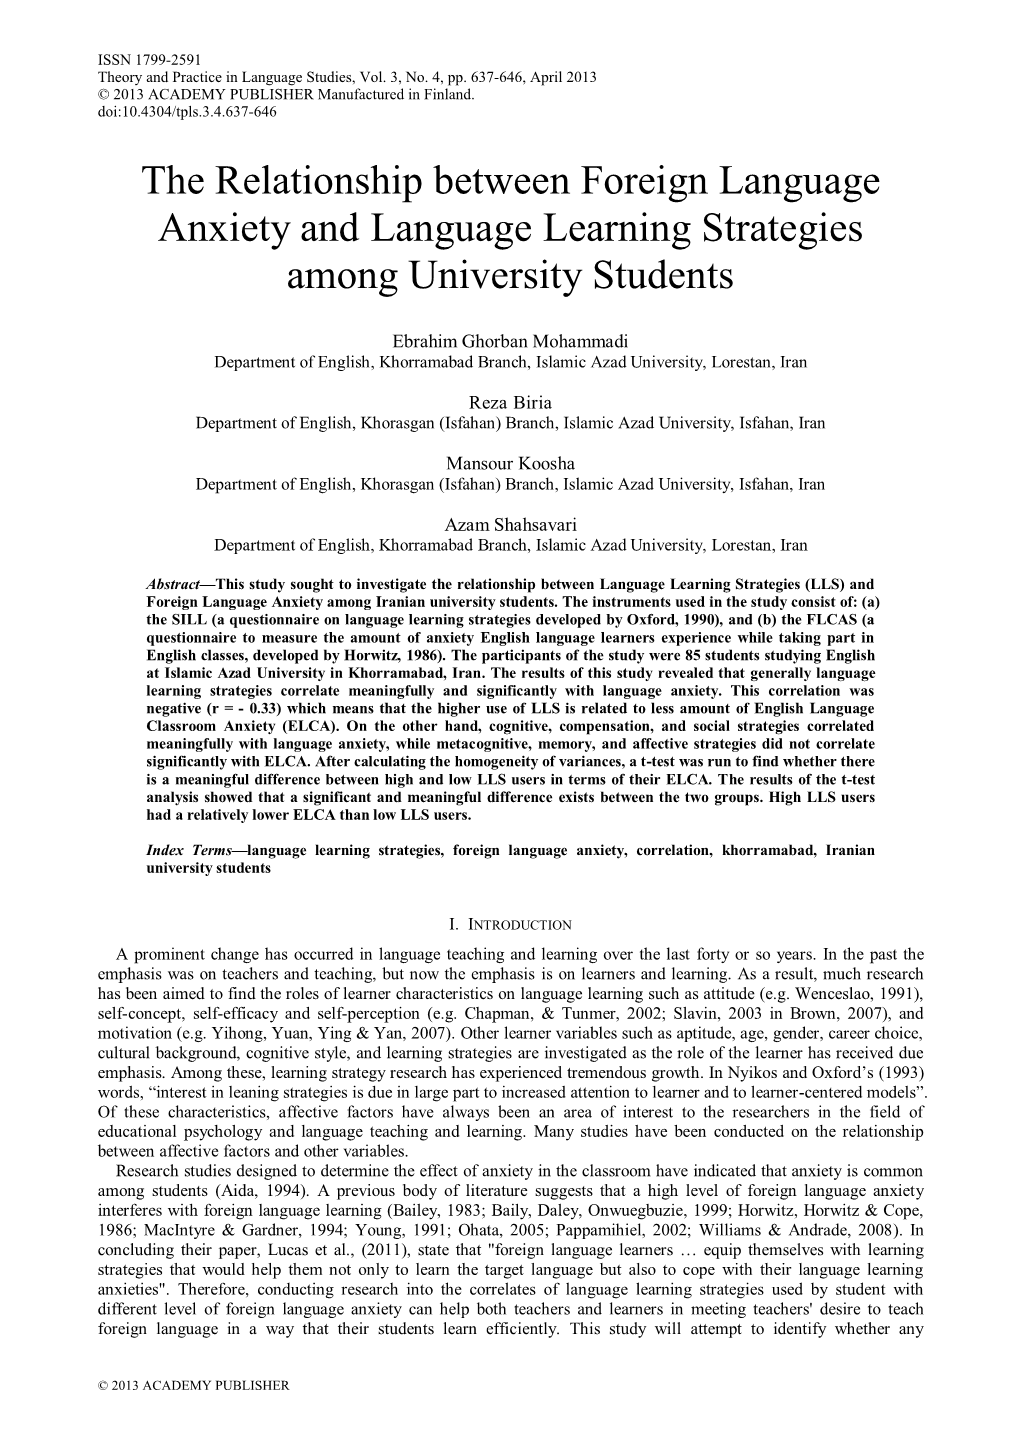 The Relationship Between Foreign Language Anxiety and Language Learning Strategies Among University Students